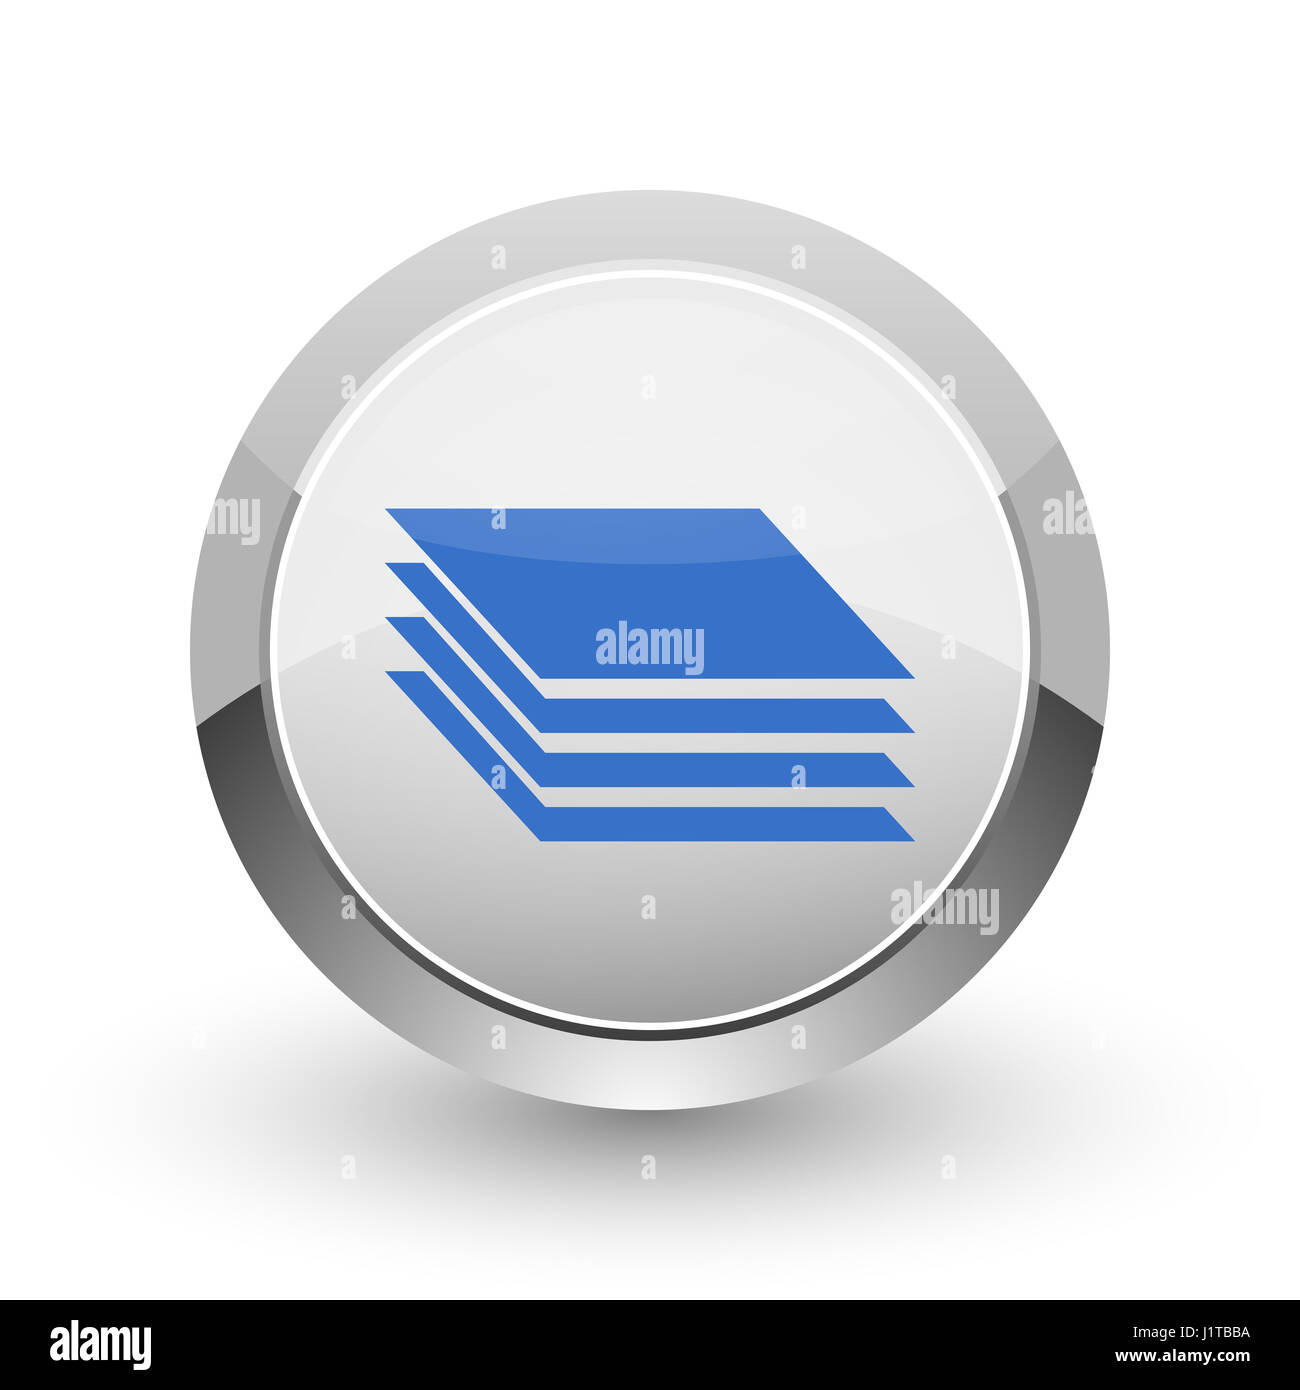 Layers chrome border web and smartphone apps design round glossy icon. Stock Photo